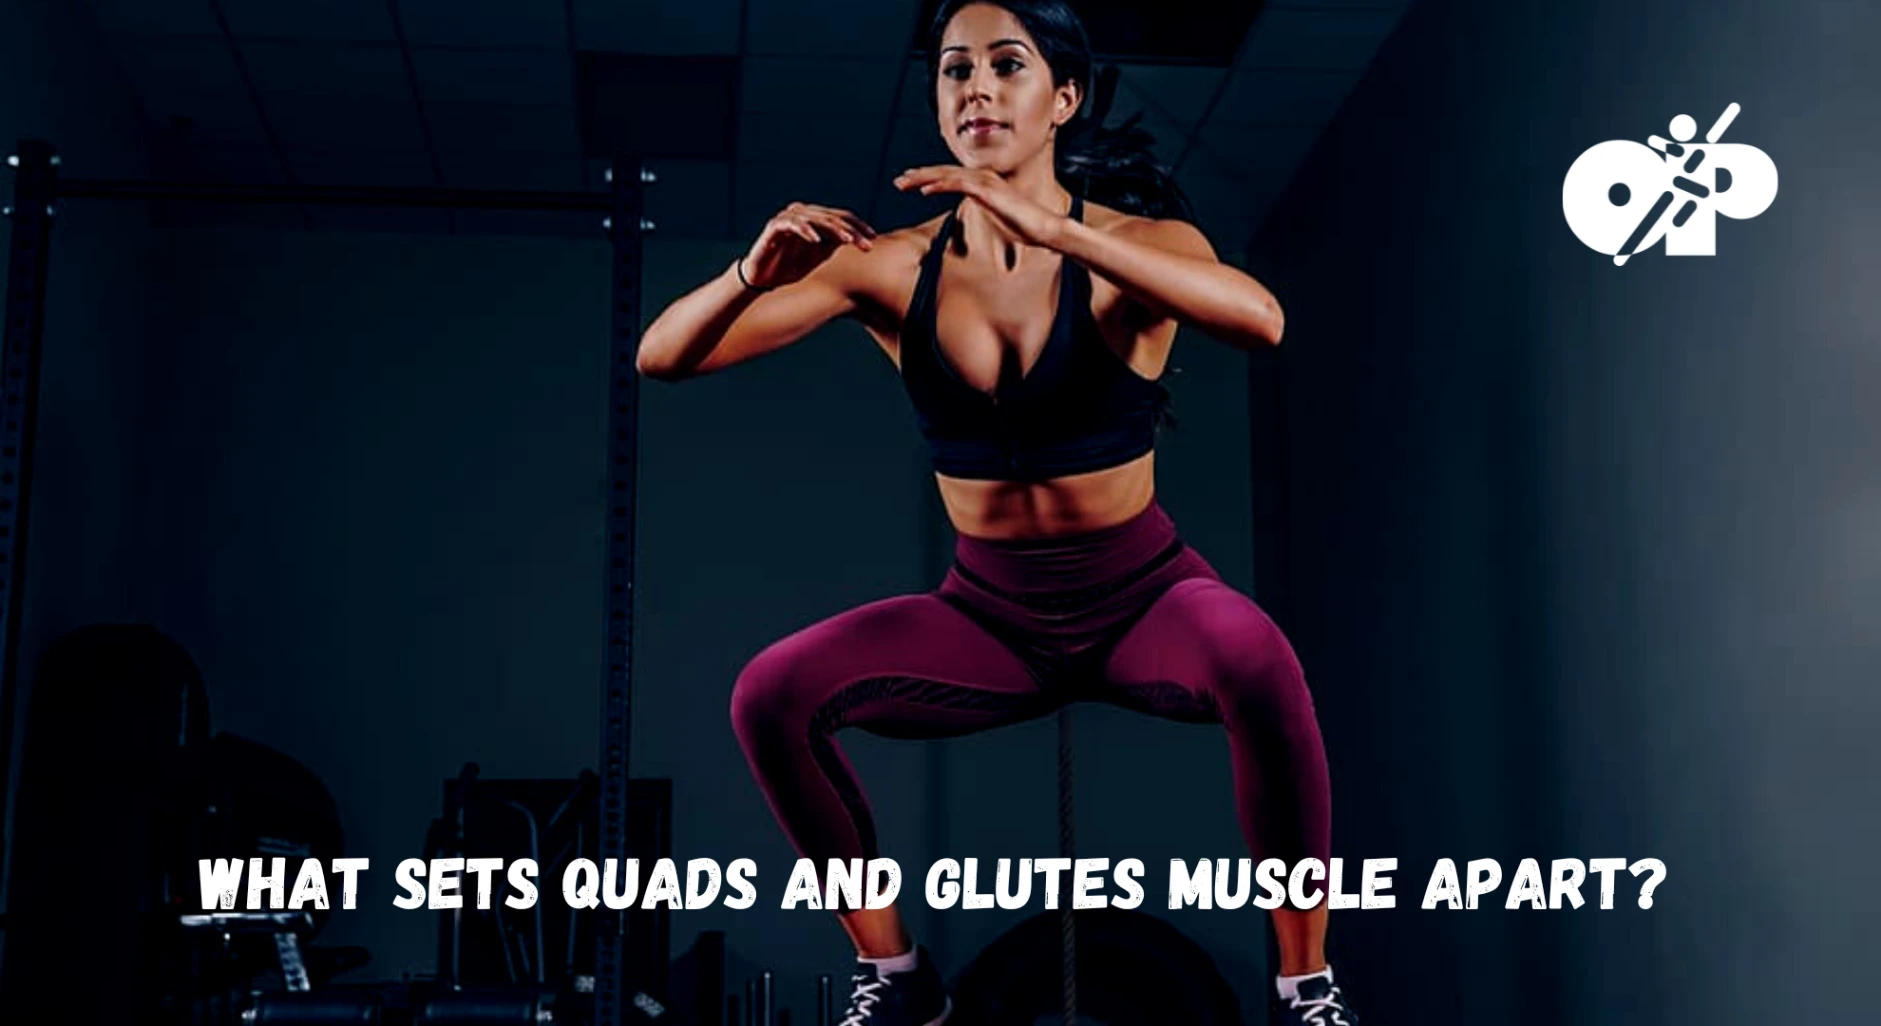 15. What Sets Quads and Glutes Muscles Apart